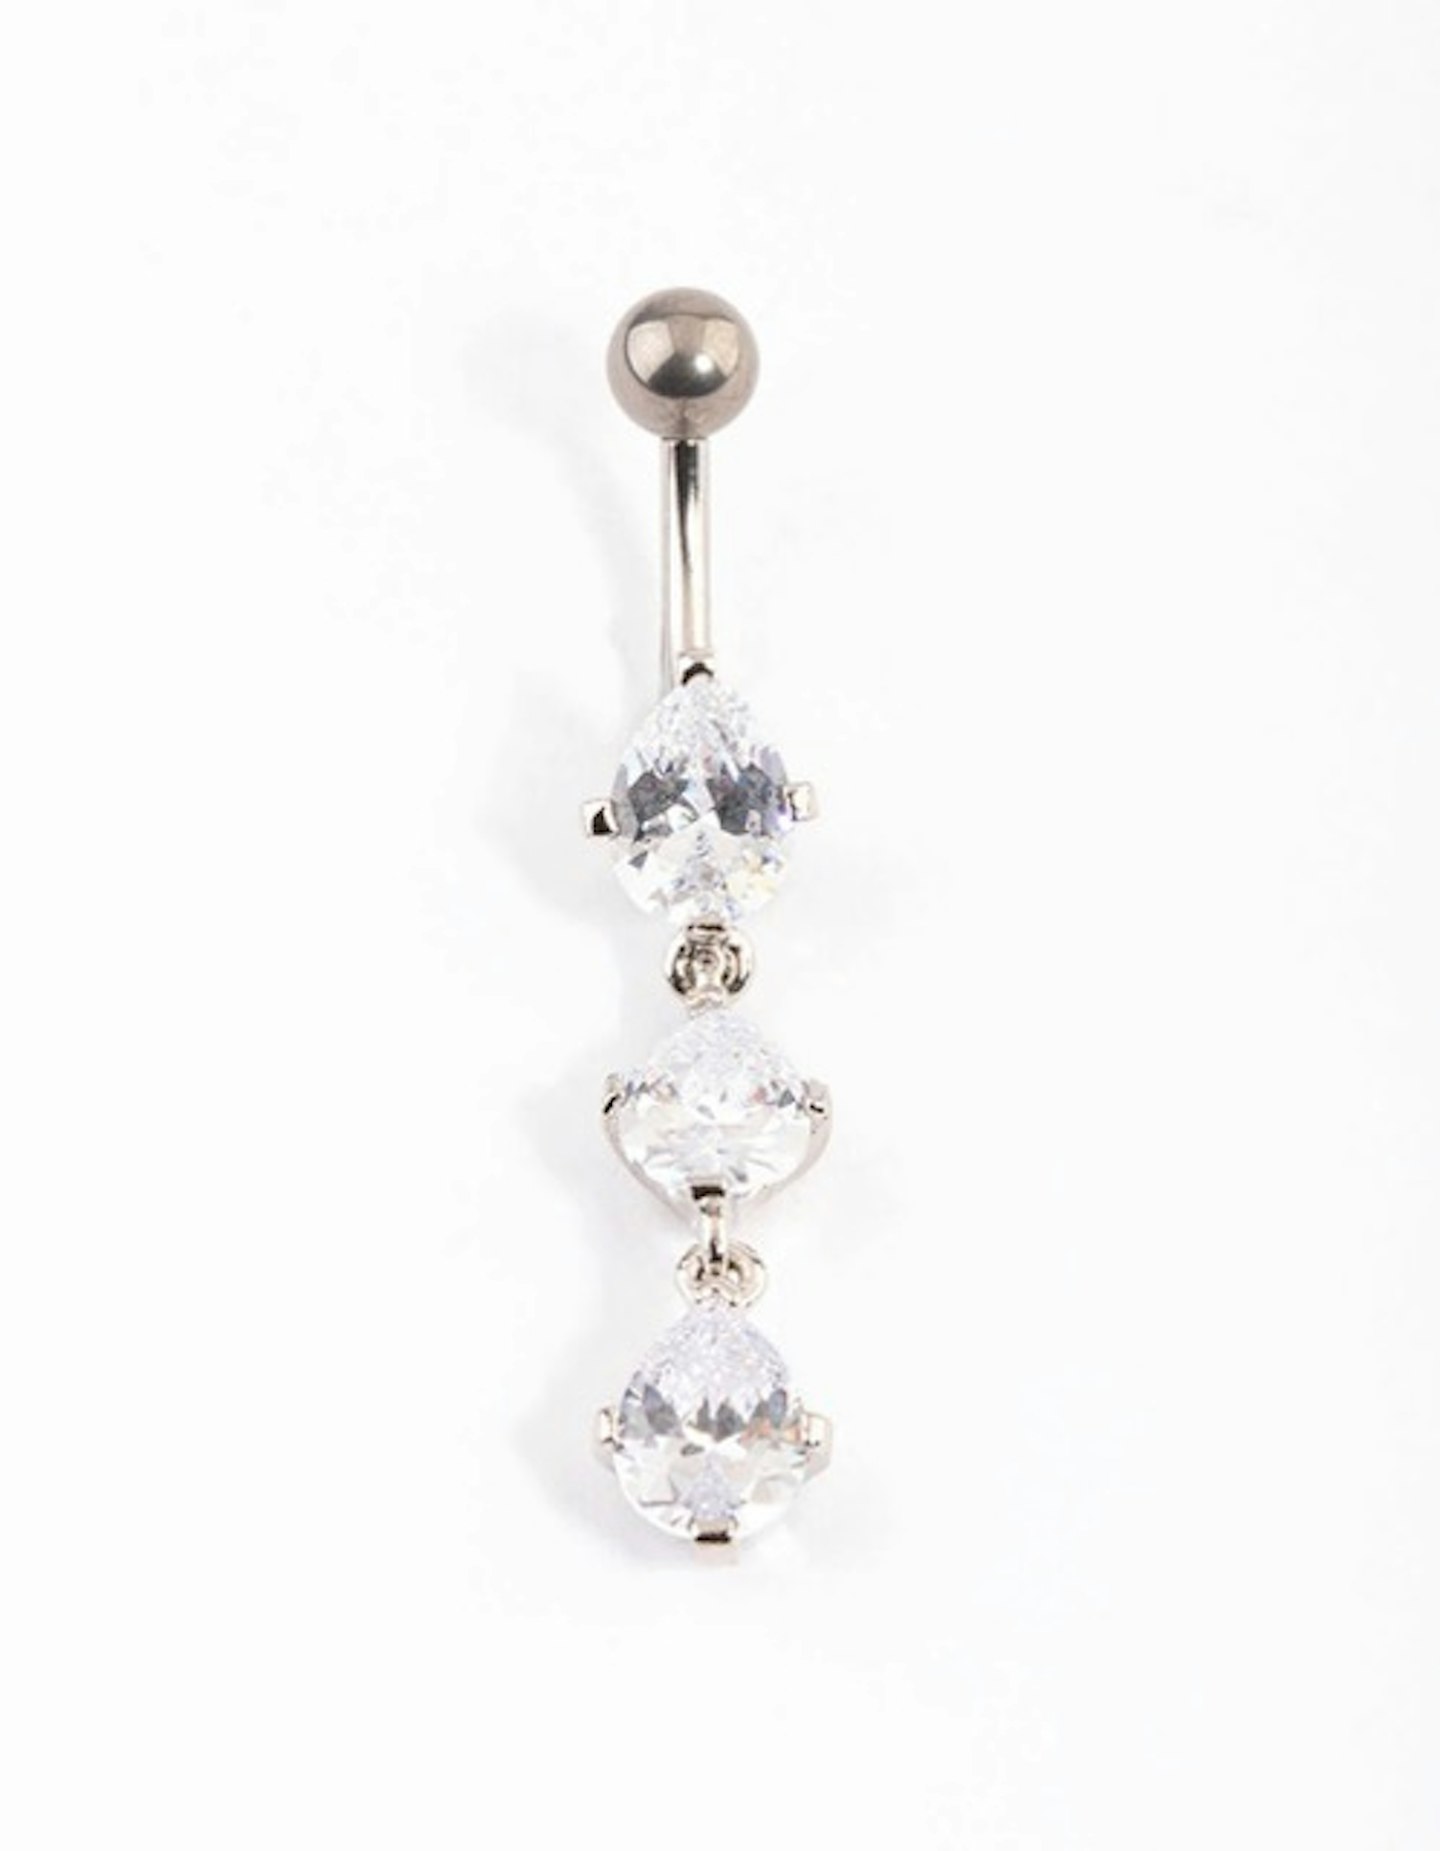 Sequin Belly Button Rings, Round Belly Piercing Jewelry